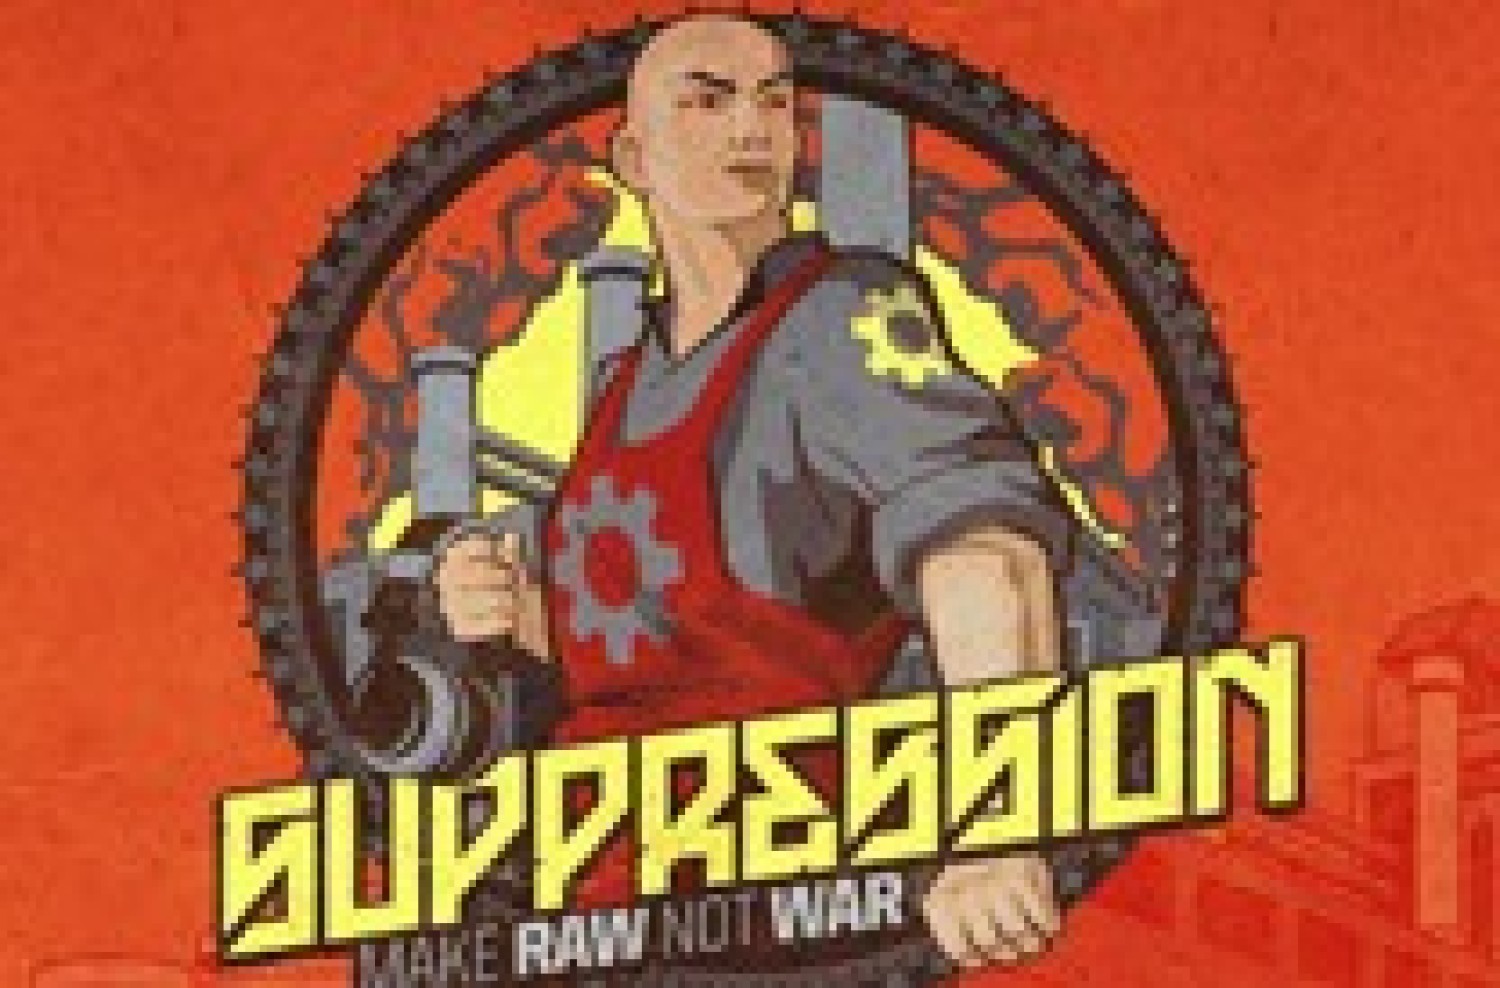 Party nieuws: Timetable voor Suppression - Make RAW not WAR #3